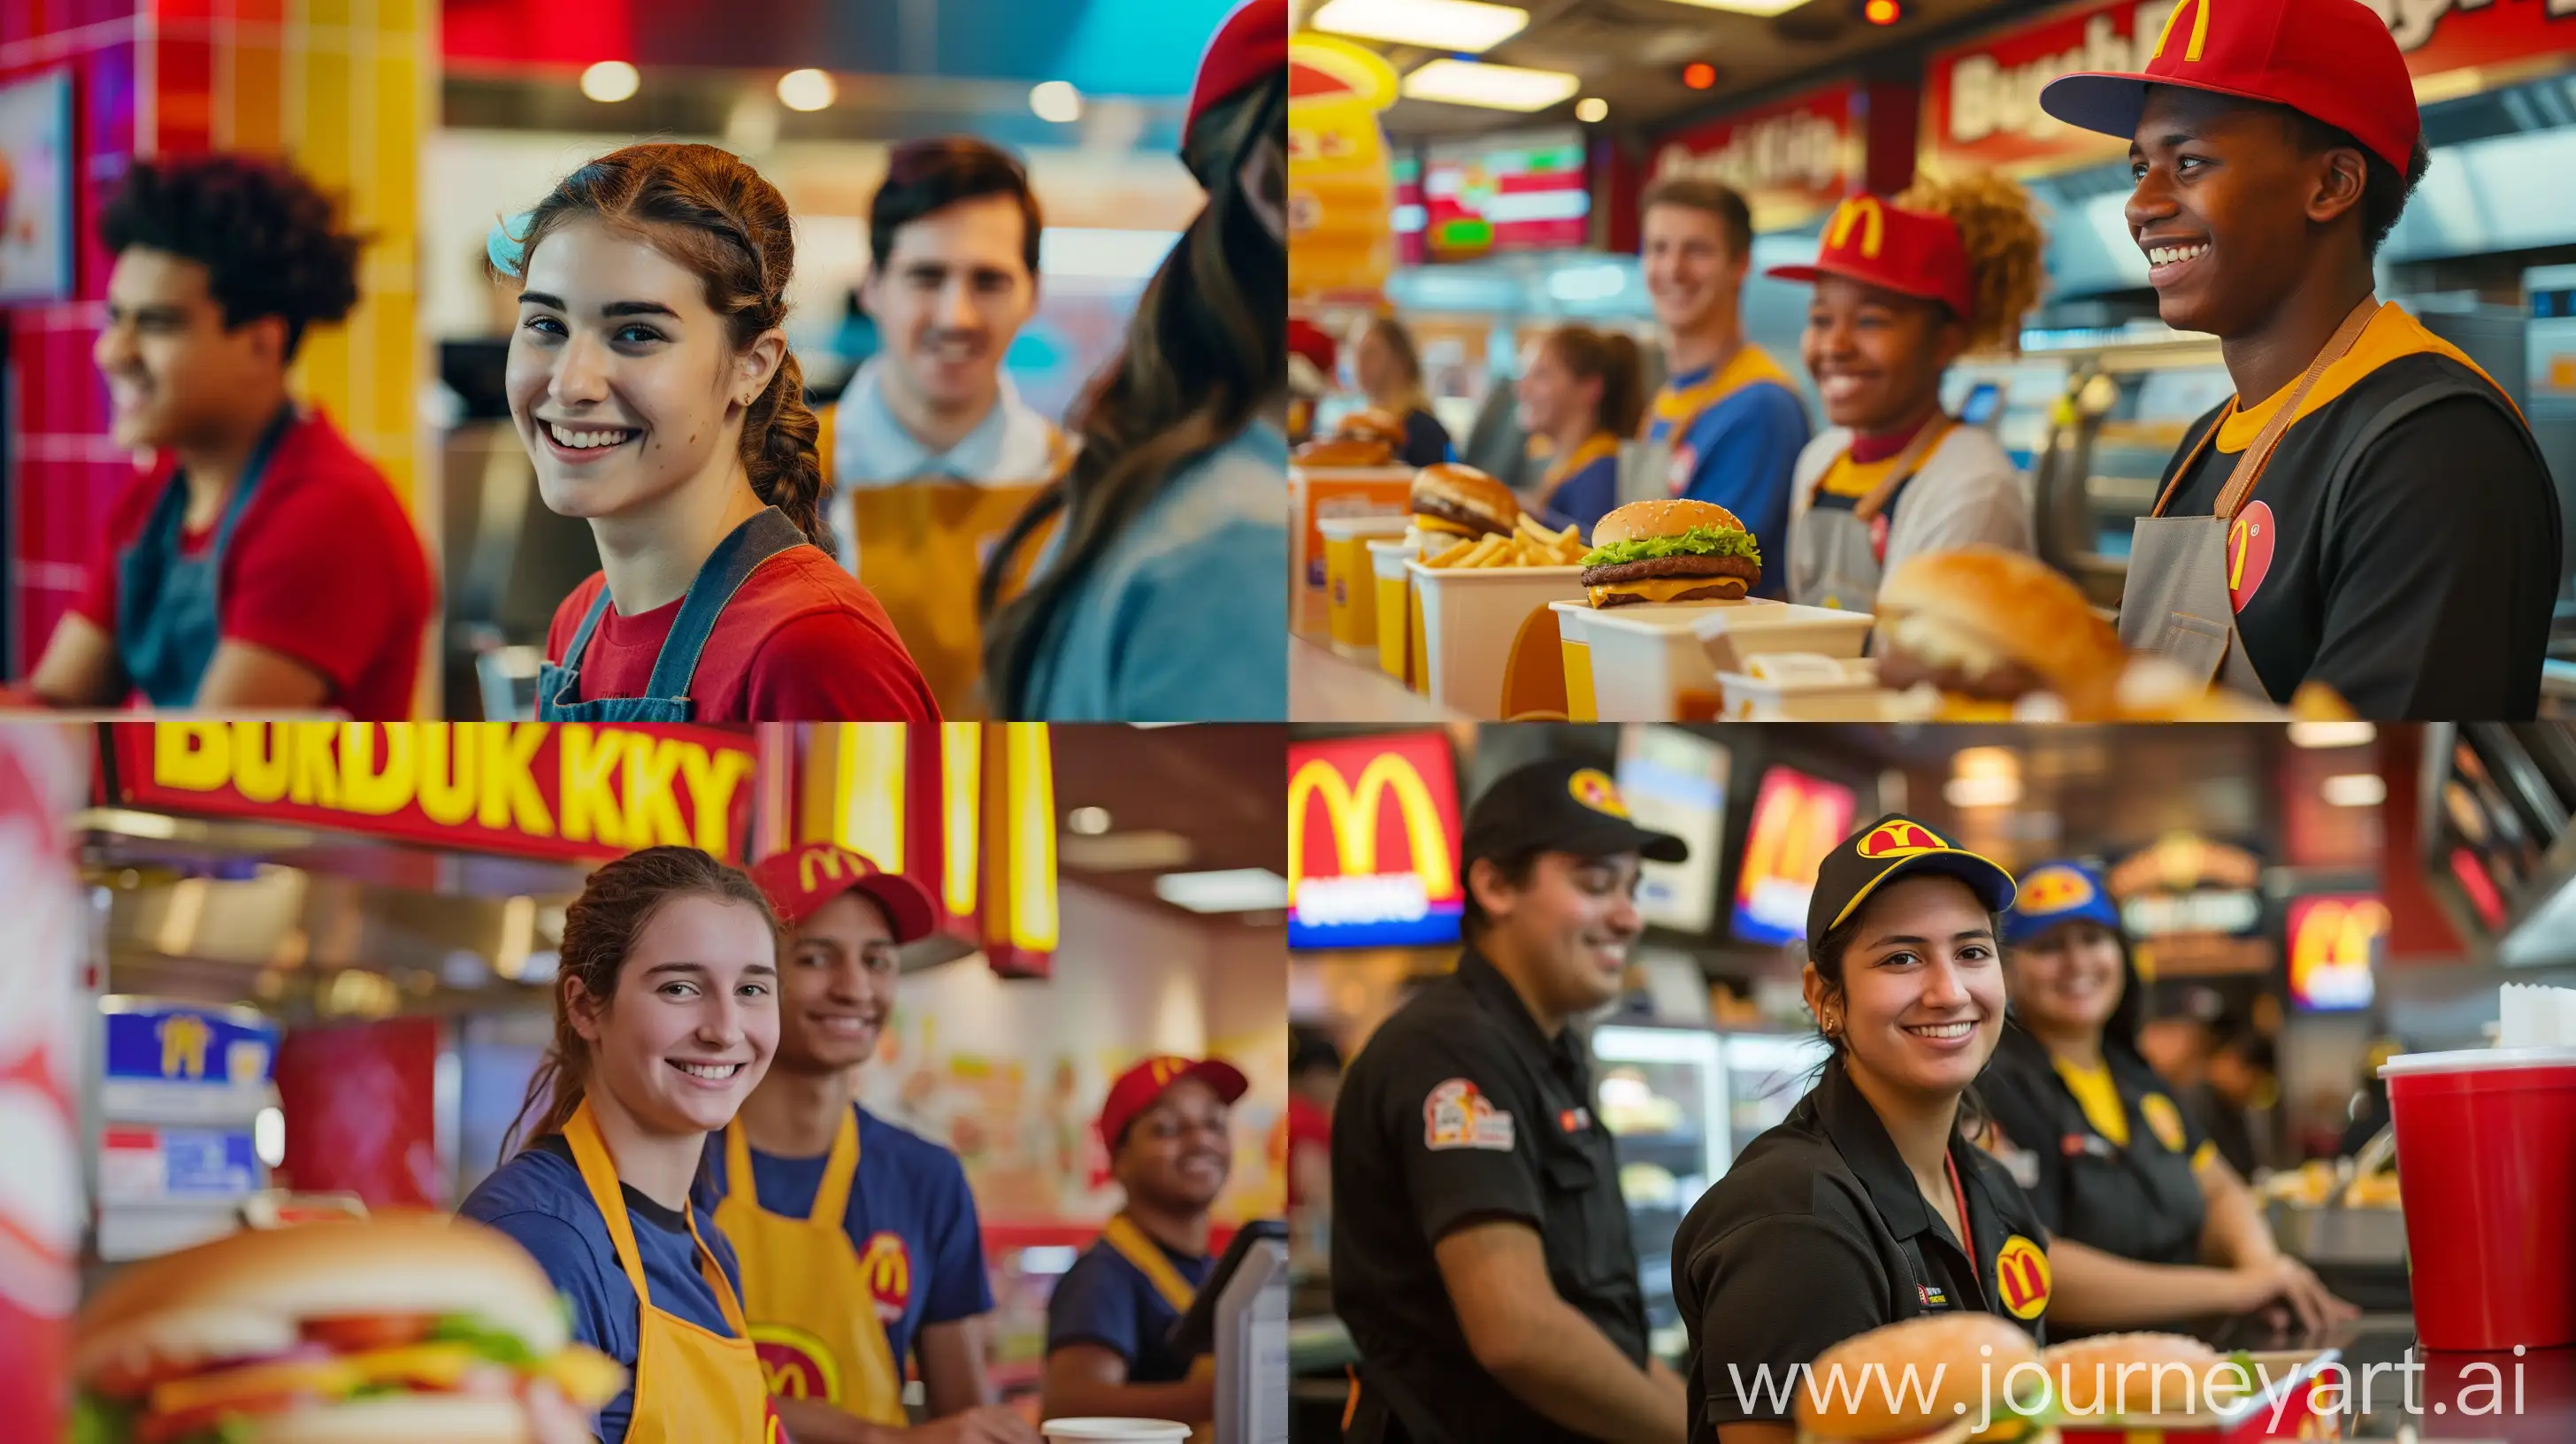 /imagine prompt: Introduction to Burger King and job opportunities available, benefits of working including competitive pay and flexible hours, testimonials from current employees who advanced, application process and requirements, training and development opportunities, FAQ section, contact information. Visual: Prominent Burger King logo, smiling employees in a fast-paced environment, color scheme with red, yellow, and blue, clean and modern design, headline: 'Join the Whopper Team!' Subheadline: 'Looking for a job that fits your schedule? Come work with us at Burger King!'::3 --aspect 16:9 